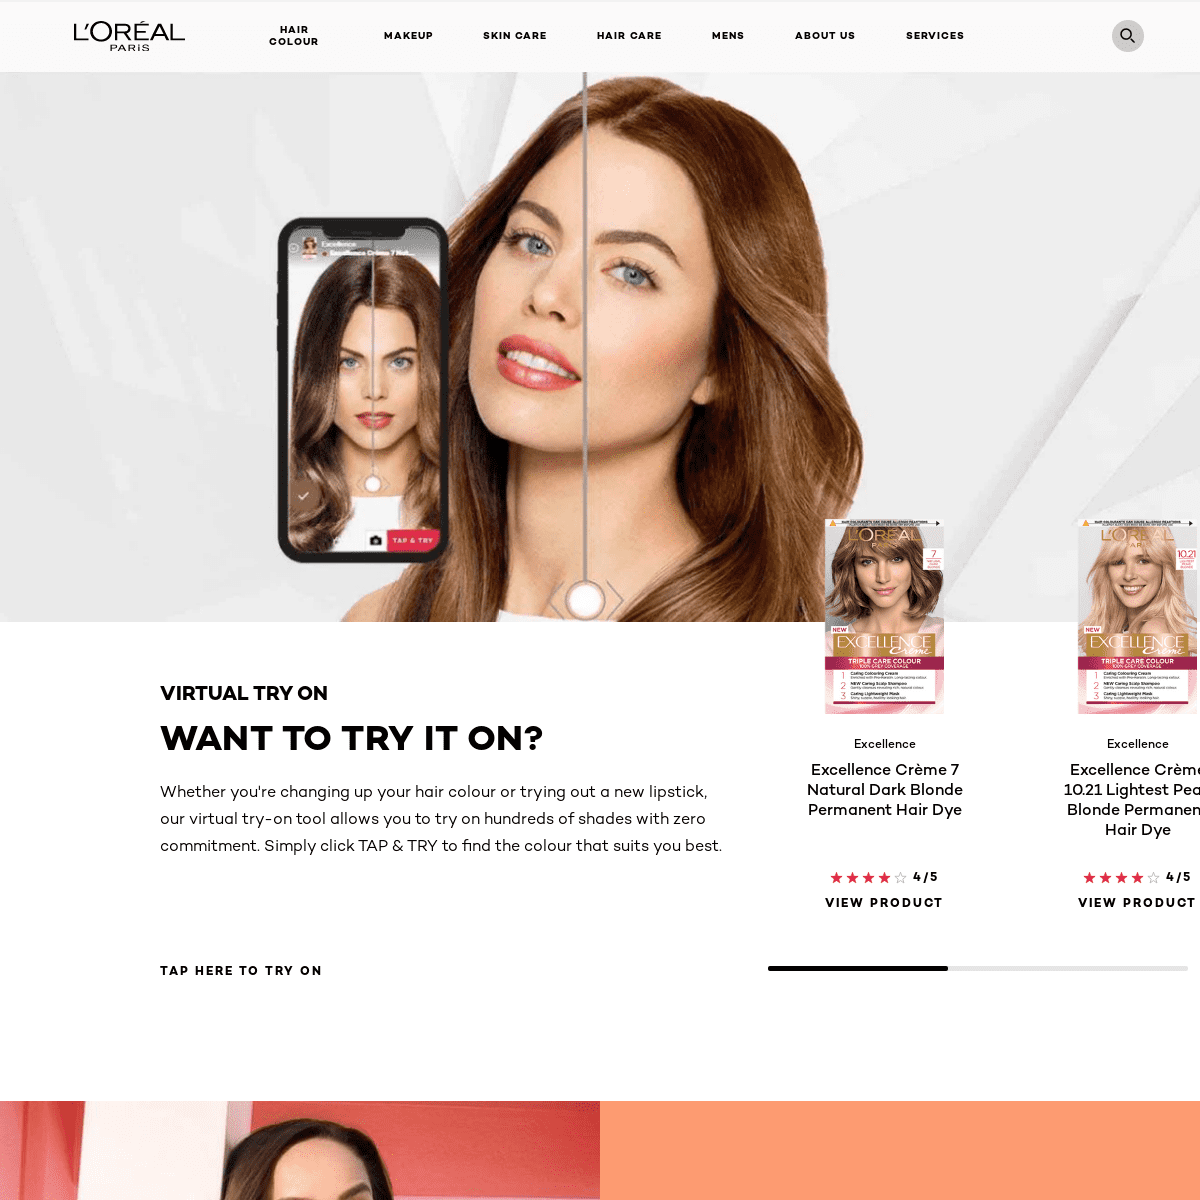 A complete backup of https://loreal-paris.co.uk